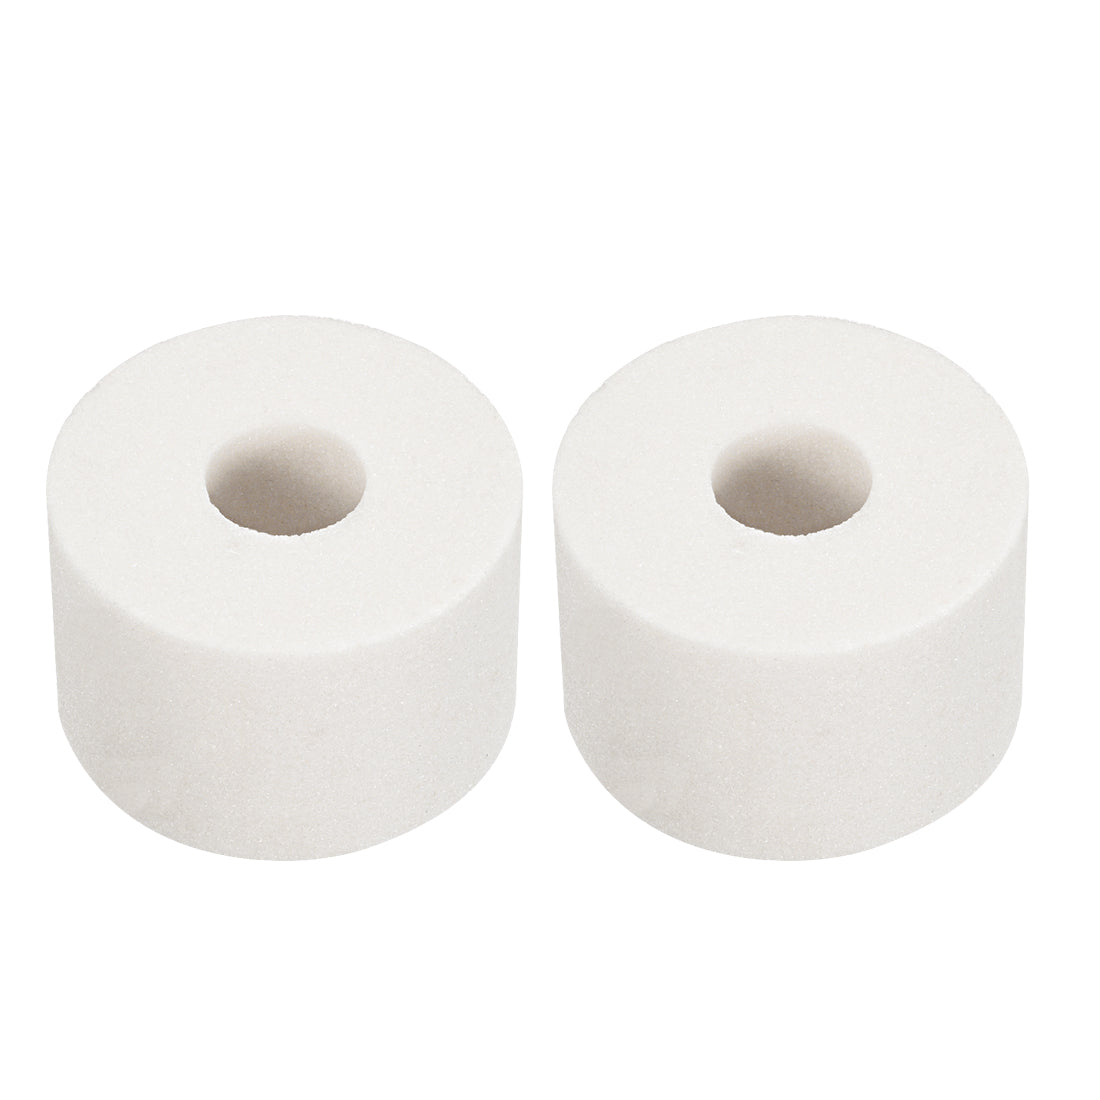 Uxcell Uxcell 2.4-inch Cylinder Grinding Wheels White Aluminum Oxide 60 Grits Tools 2 Pcs